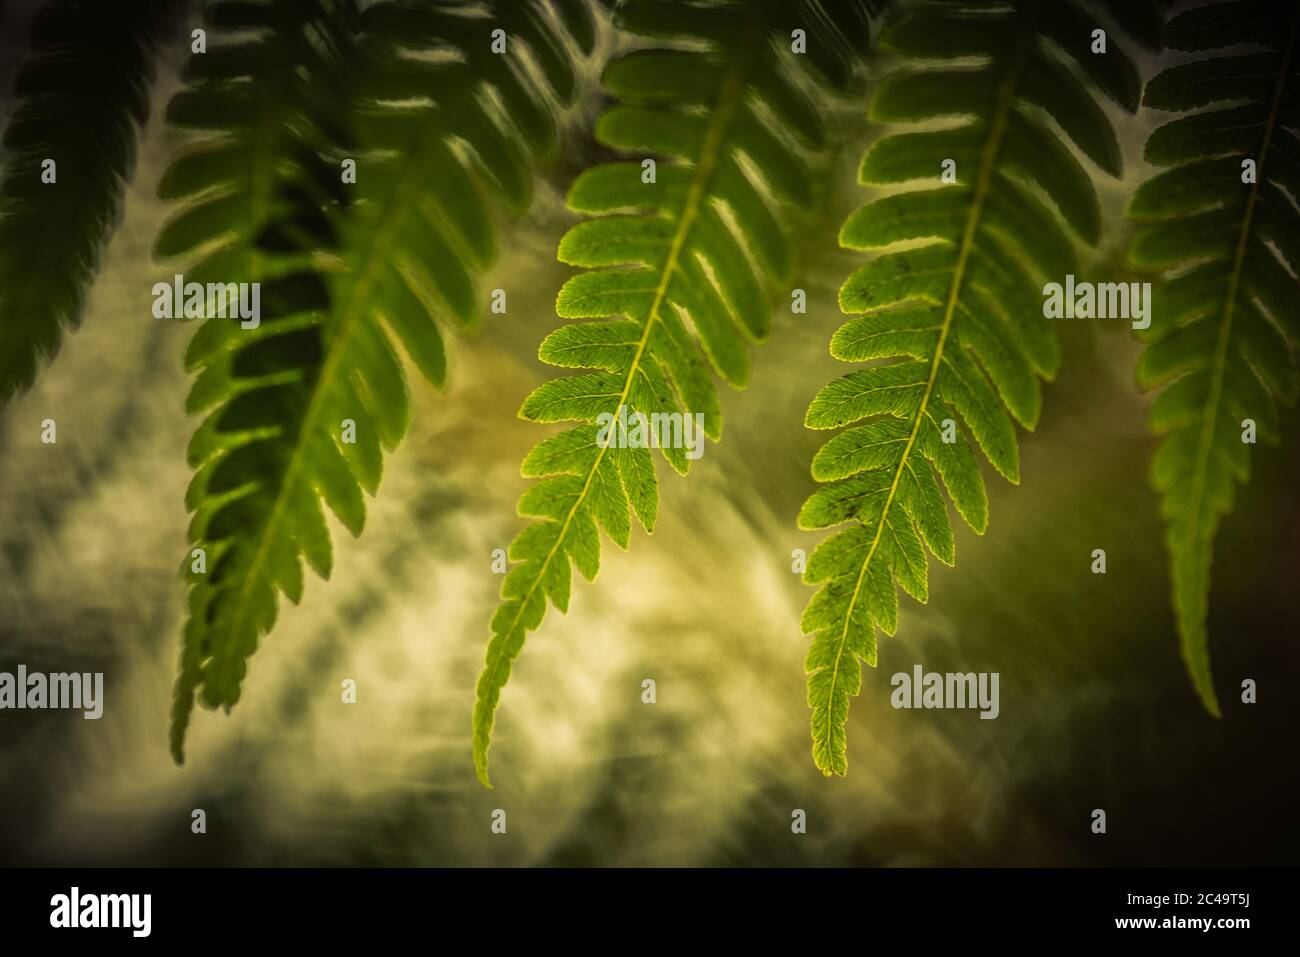 Tropical fern leaves in front of a blurred light green background. Stock Photo